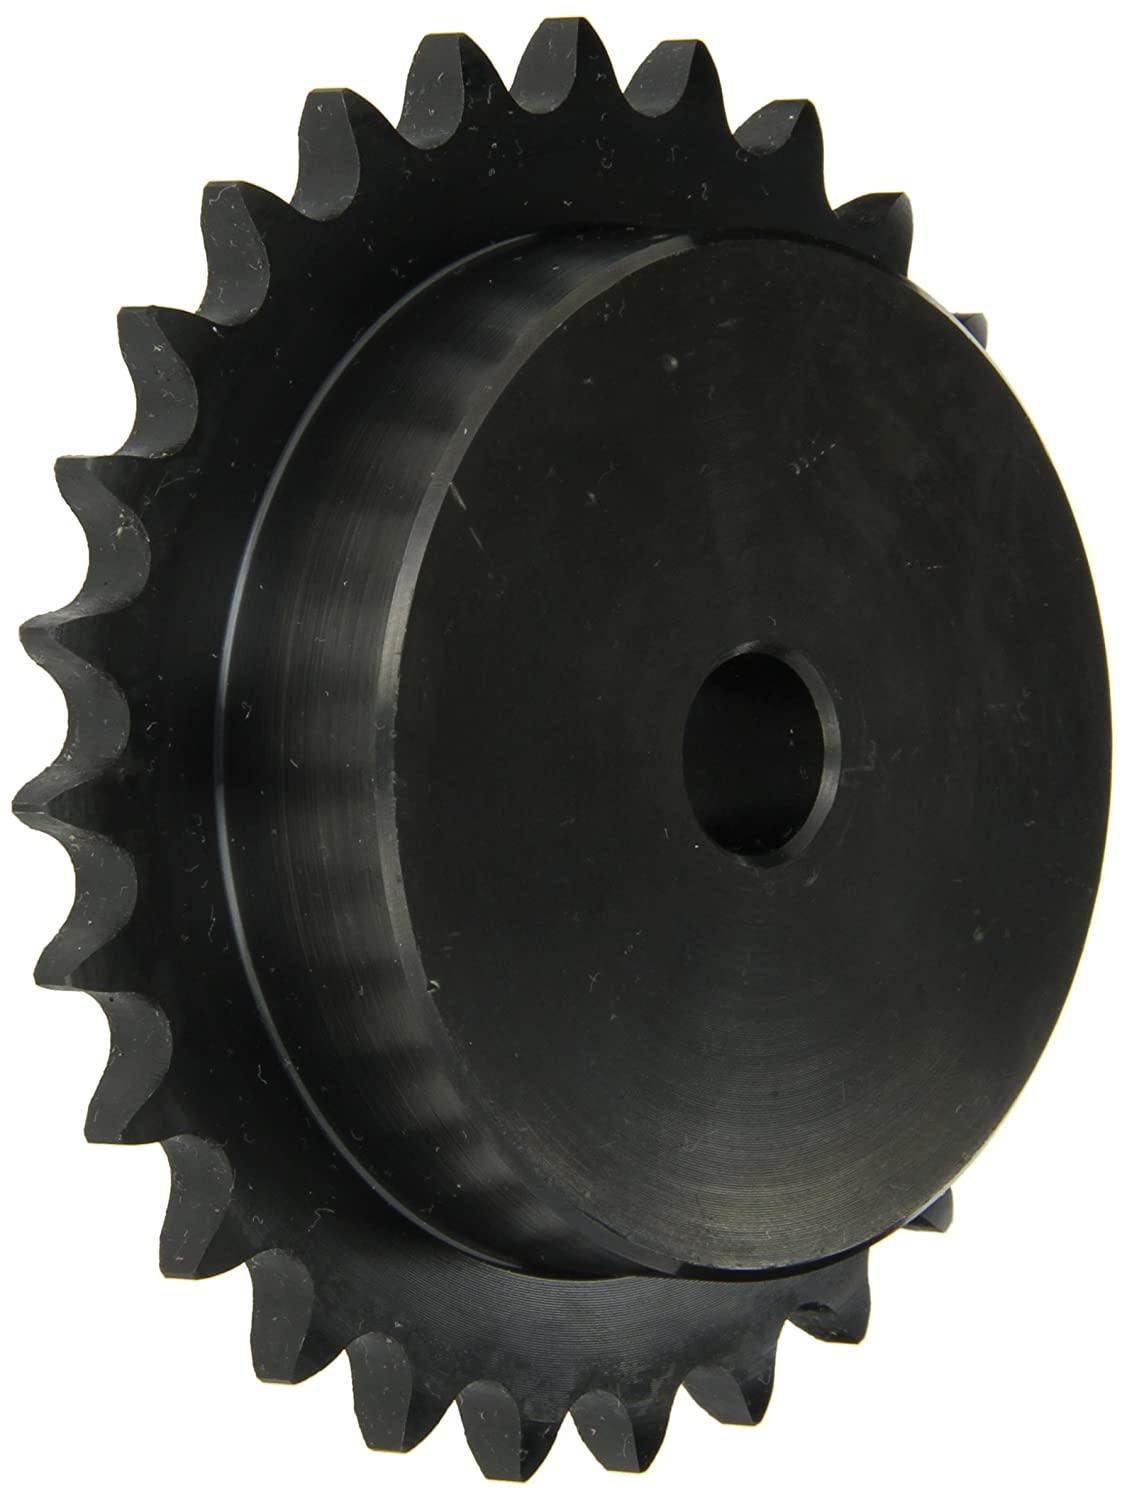 25B40 Roller Chain Sprocket With Stock Bore - Forces Inc